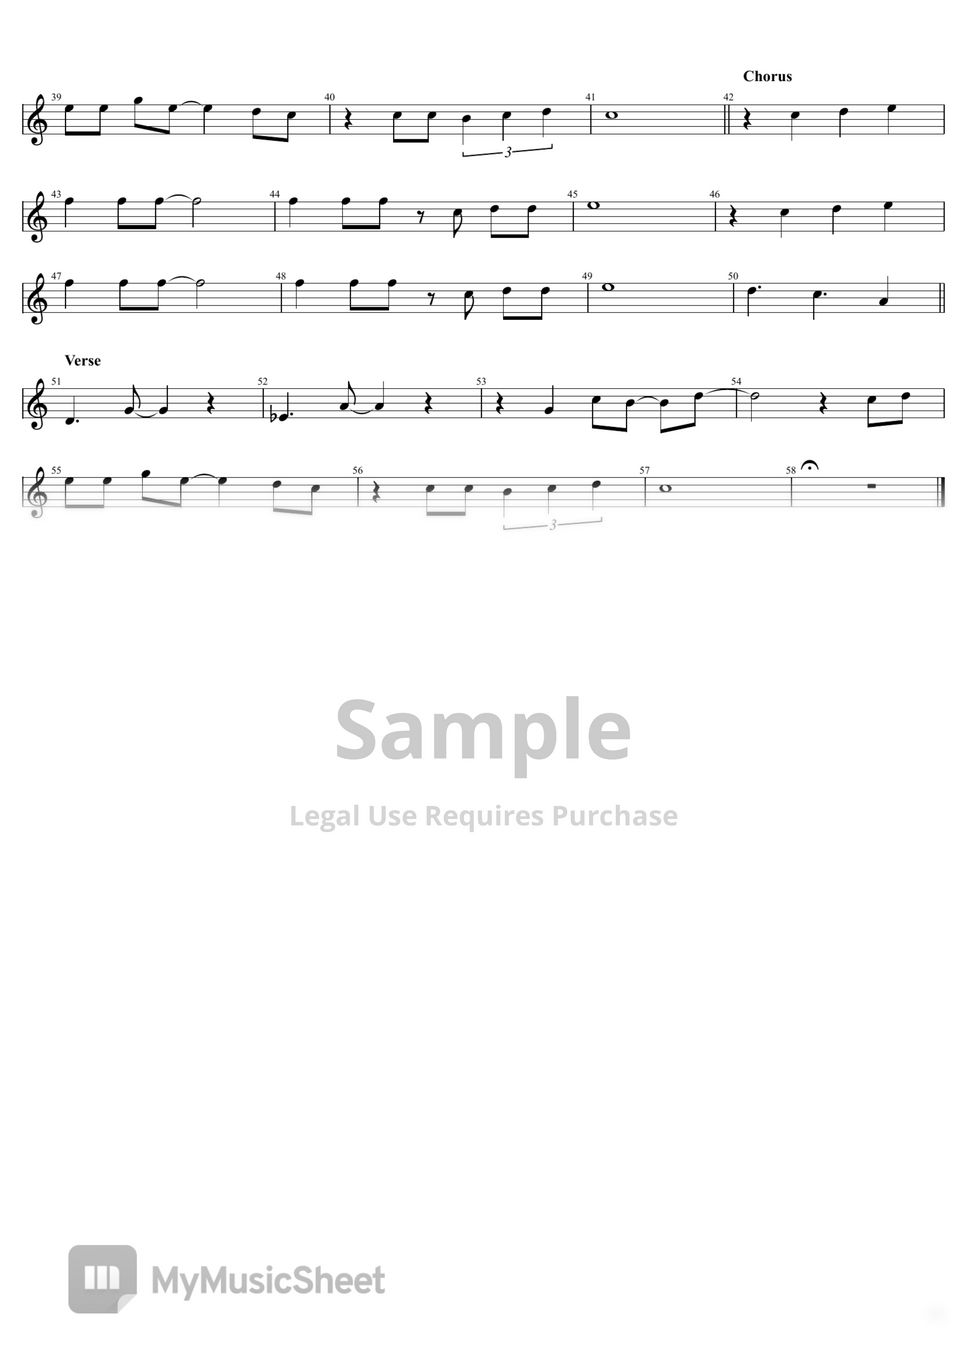 The Beatles - I'll Follow The Sun (Score for "C Key" instruments) by EMST